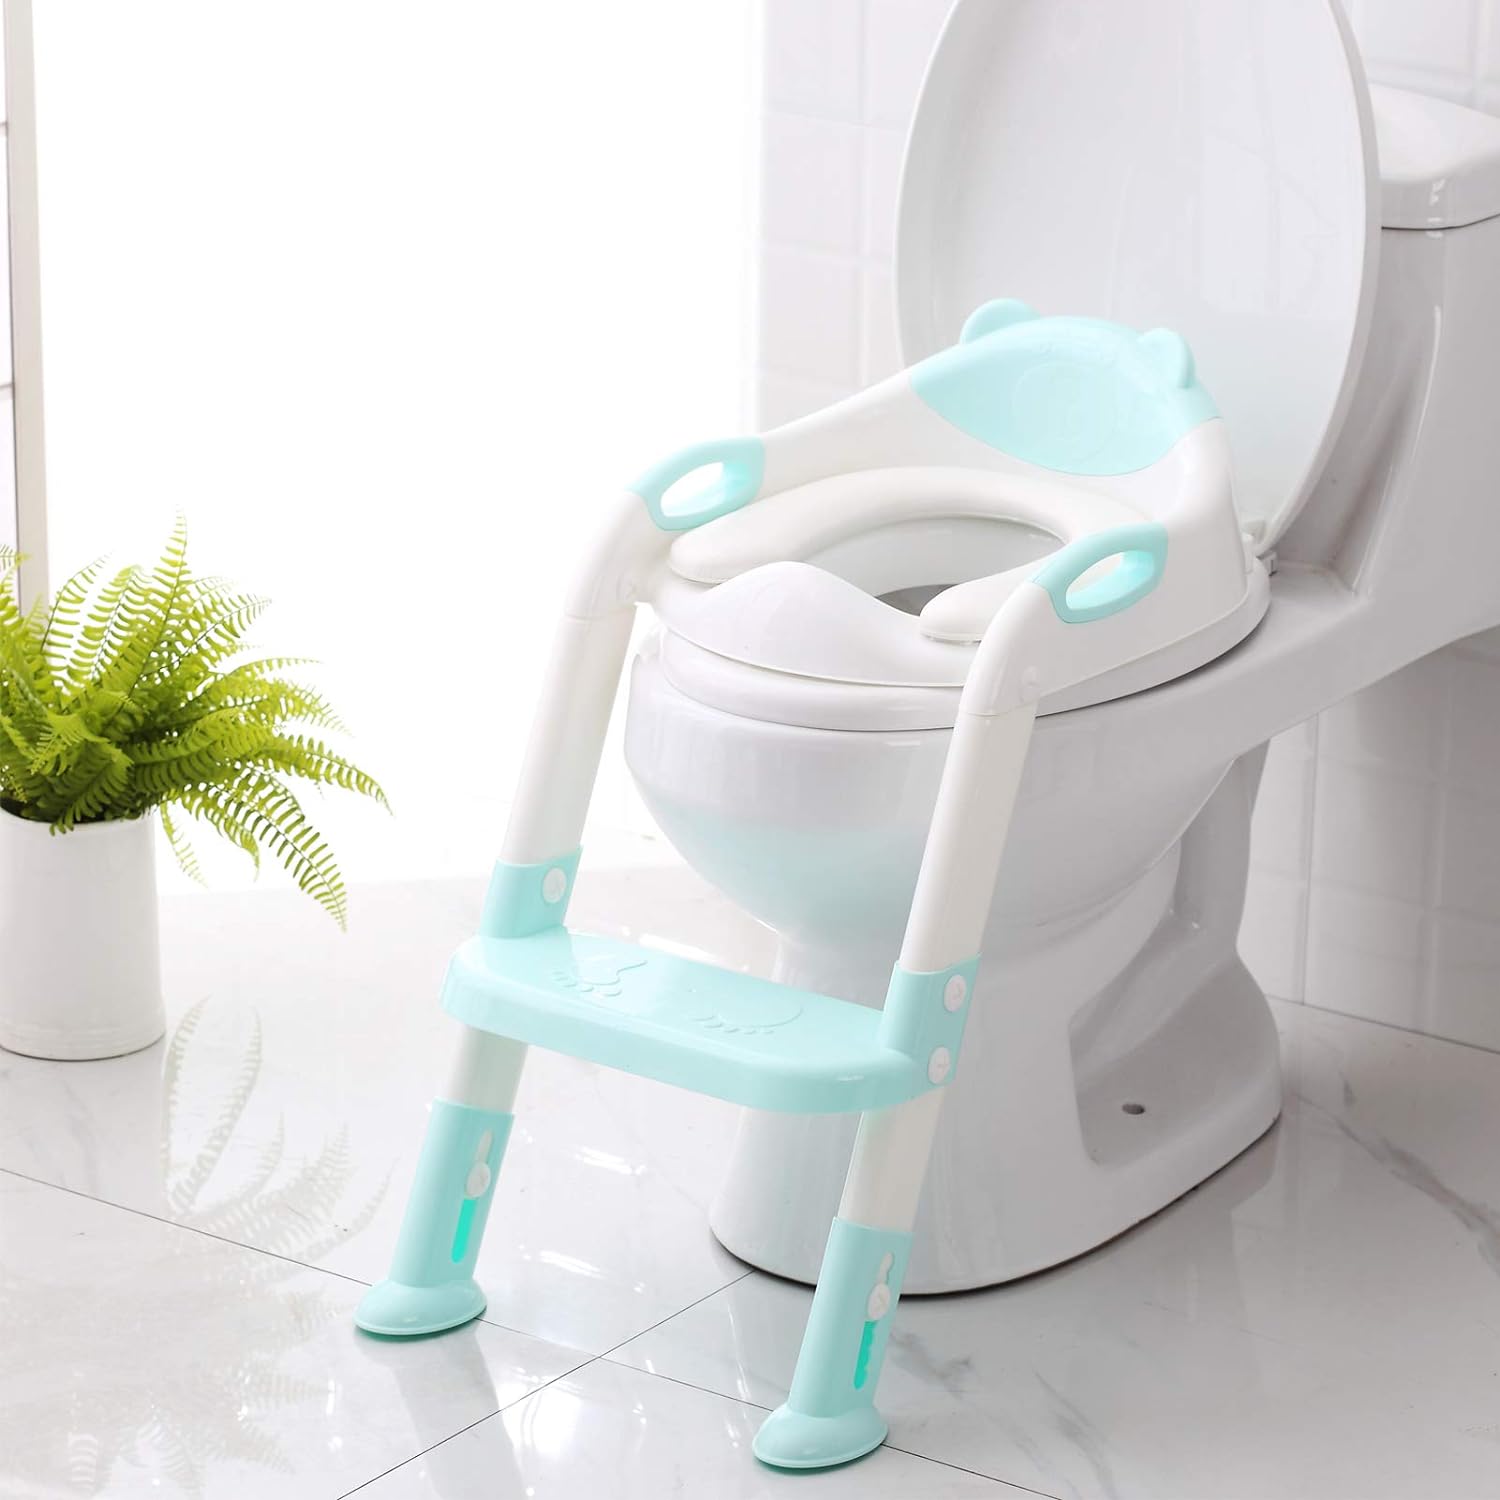 Potty Training Seat with Step Stool Ladder Potty Training Toilet for Kids